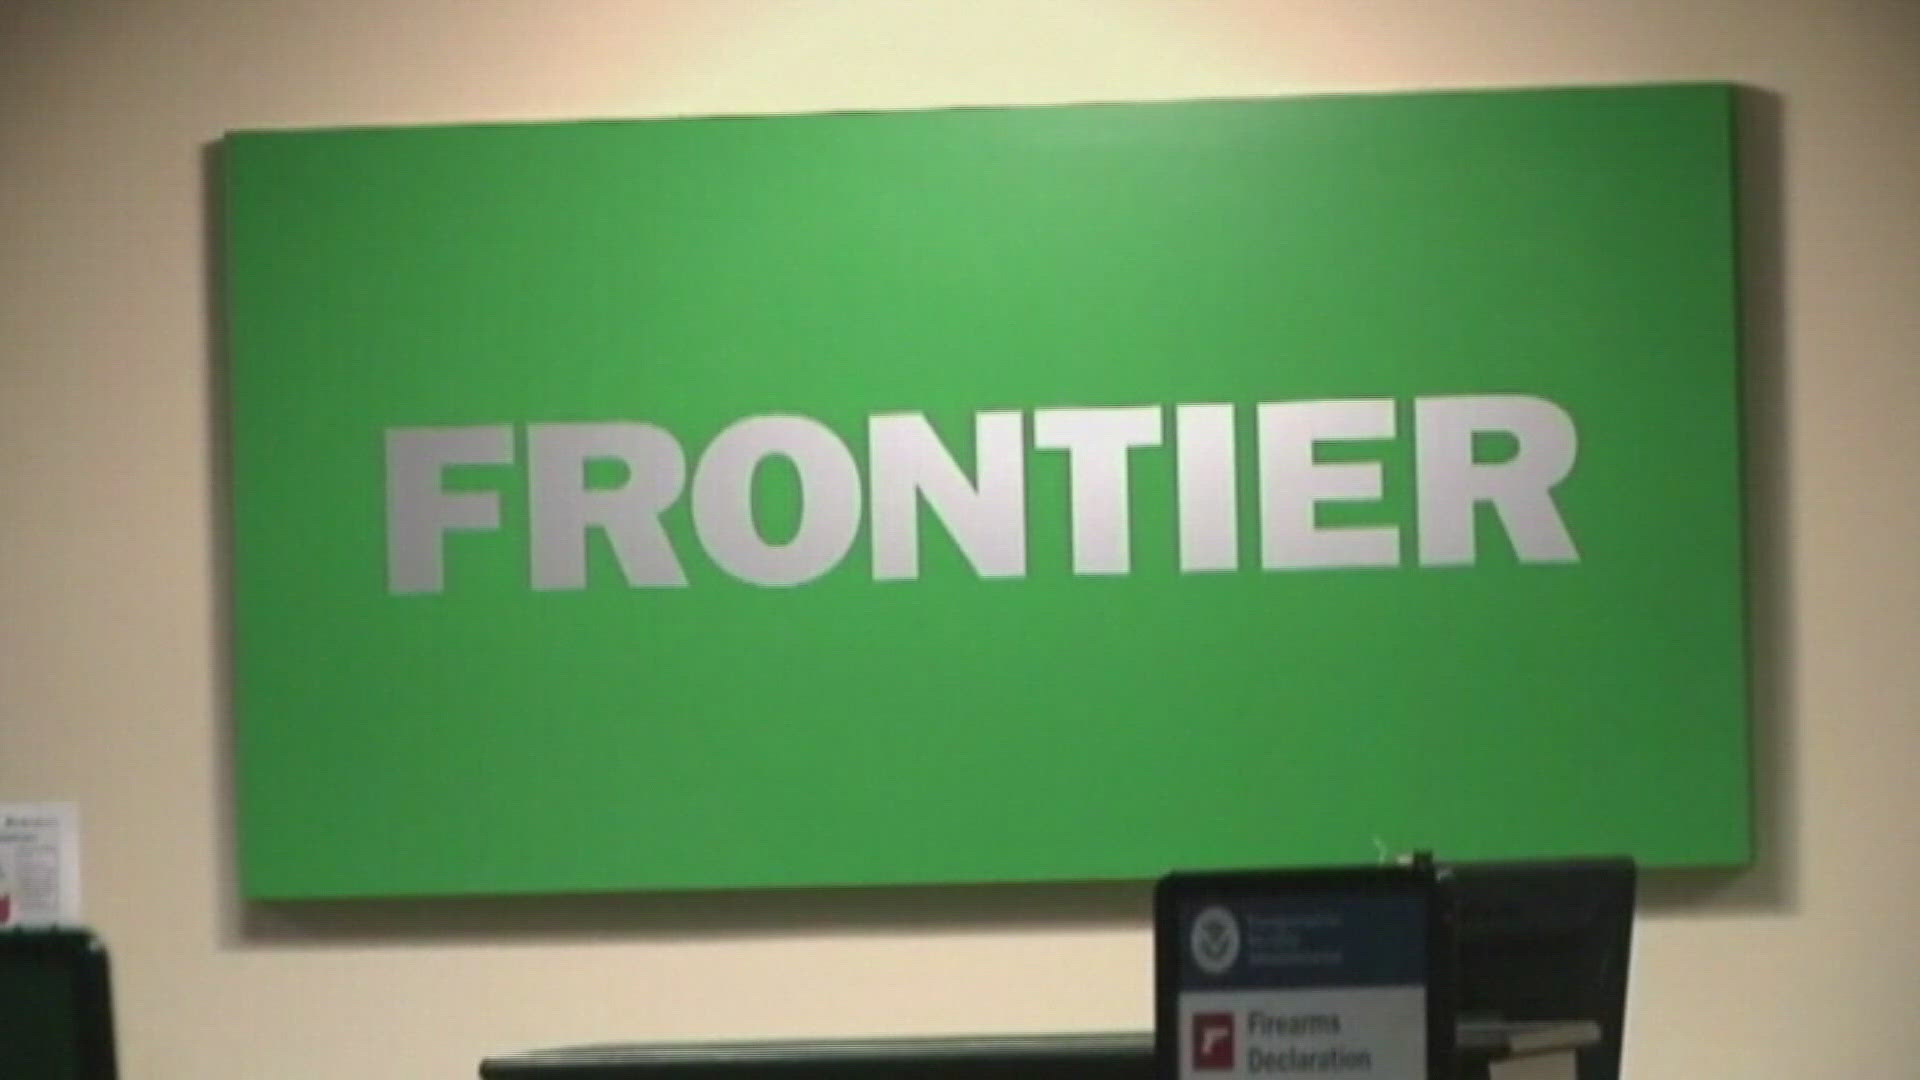 Frontier Airlines has begun offering new nonstop flights from Cleveland Hopkins International Airport to multiple destinations including Austin, Texas and Baltimore.